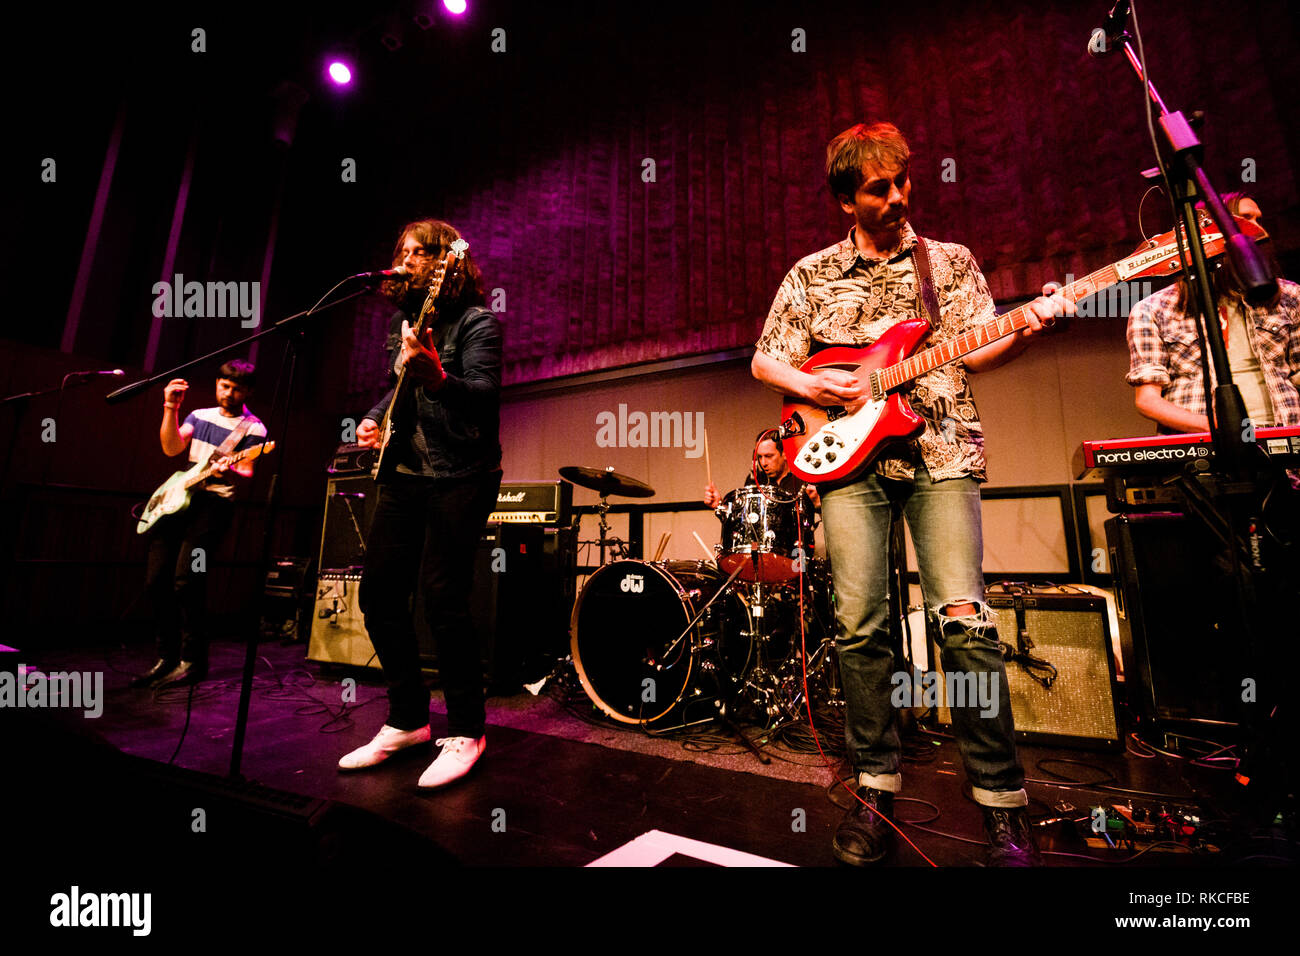 Cambridge, UK. 10th February, 2019. American indie rock band Gringo Star perfoms live at Storey’s Field Centre in Eddington supporting band ...And You Will Know Us by the Trail of Dead. Richard Etteridge / Alamy Live News Stock Photo